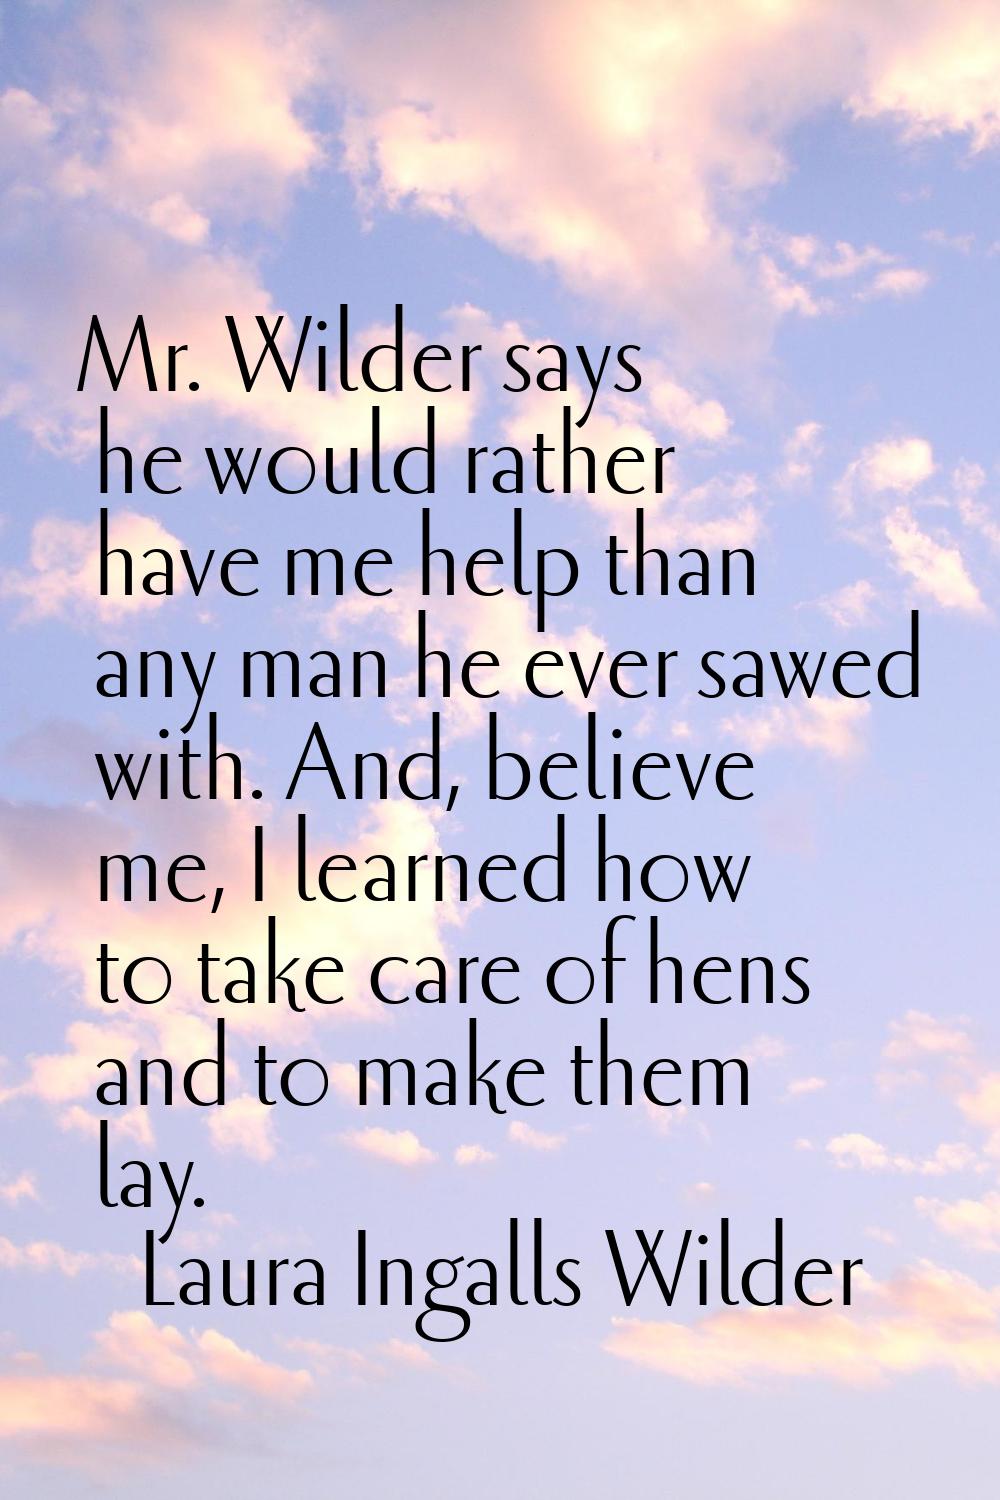 Mr. Wilder says he would rather have me help than any man he ever sawed with. And, believe me, I le